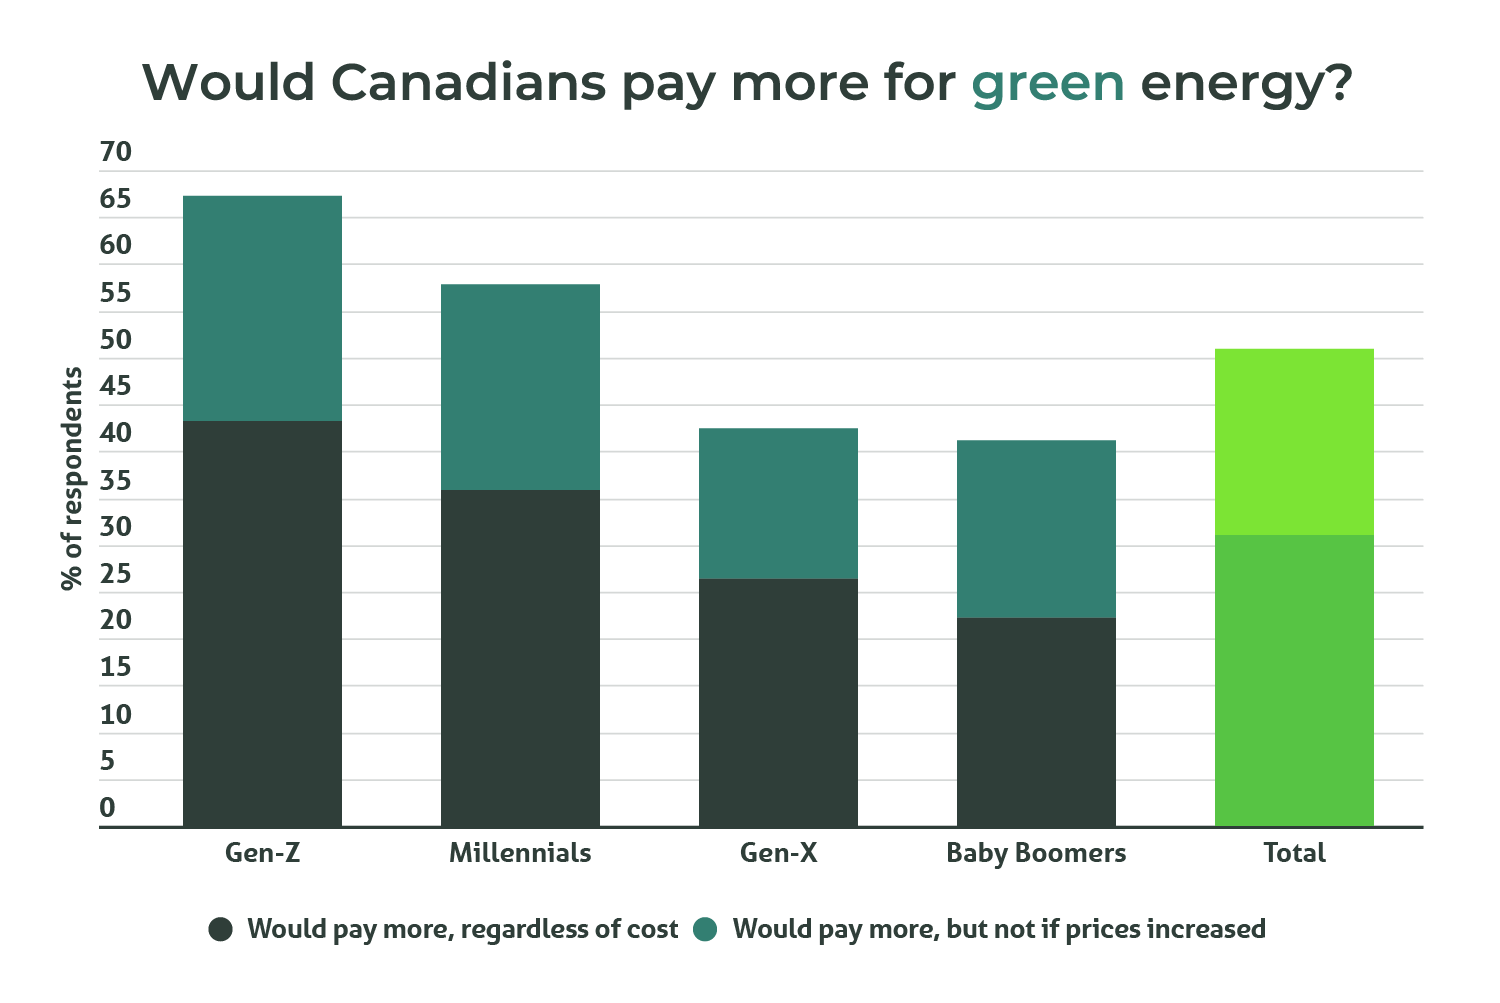 A column graph showing what percentage of Canadians would pay more for green energy by age group